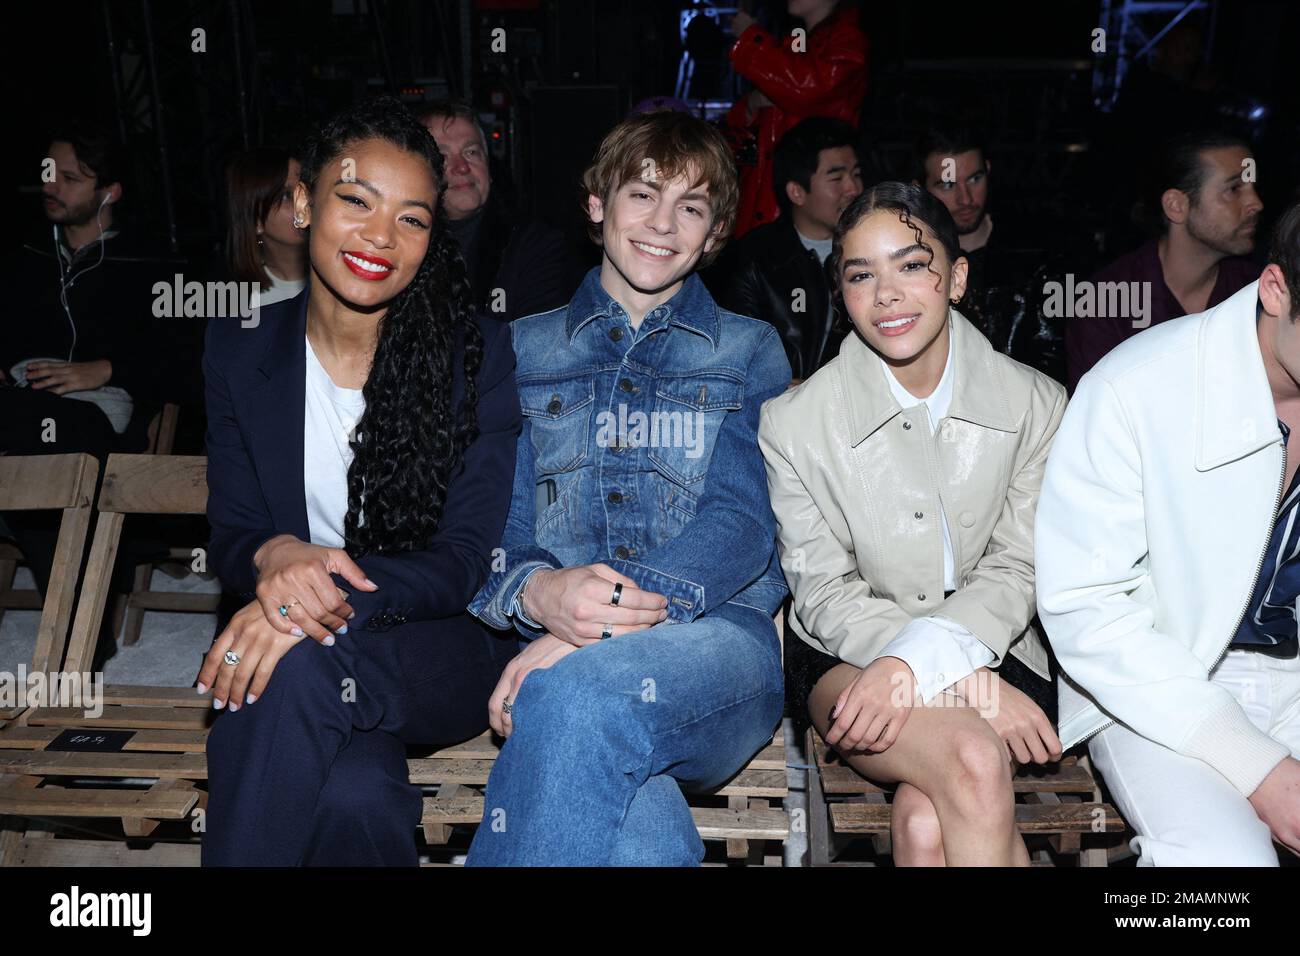 Paris, France. 19th Jan, 2023. Jaz Sinclair, Ross Lynch and Antonia Gentry attending the AMI - Alexandre Mattiussi Frontrow at the Paris Fashion Week - Menswear Fall-Winter 2023 as part of Paris Fashion Week on January 19, 2023 in Paris, France. Photo by Jerome Dominé/ABACAPRESS.COM Credit: Abaca Press/Alamy Live News Stock Photo